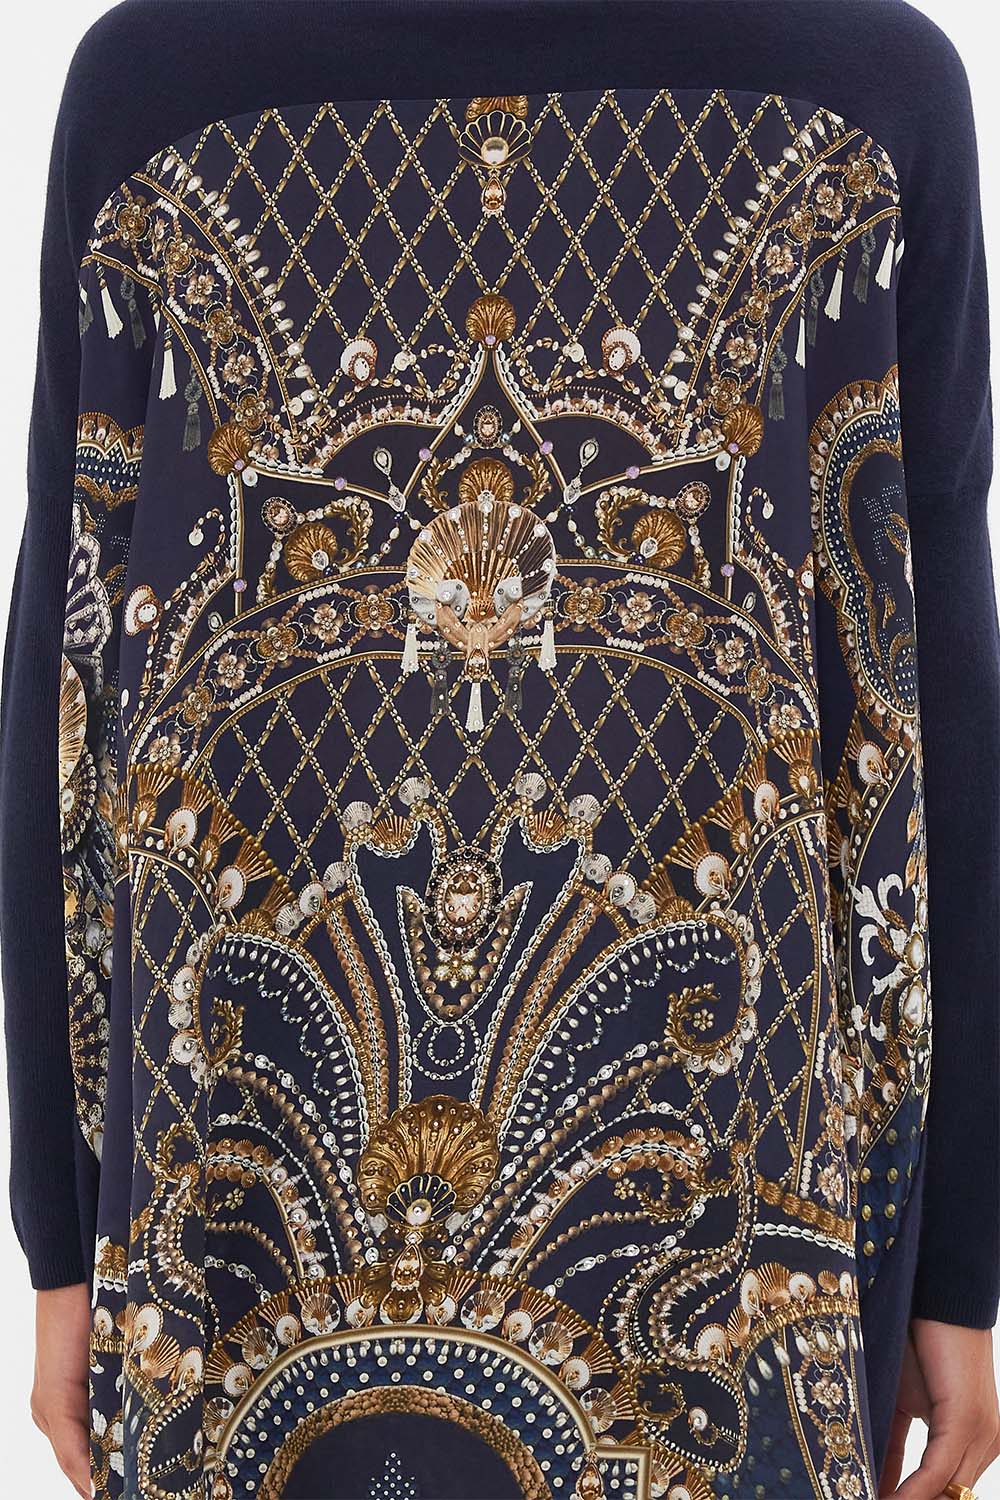 CAMILLA black/gold long sleeve jumper with print back in Dance With The Duke print.